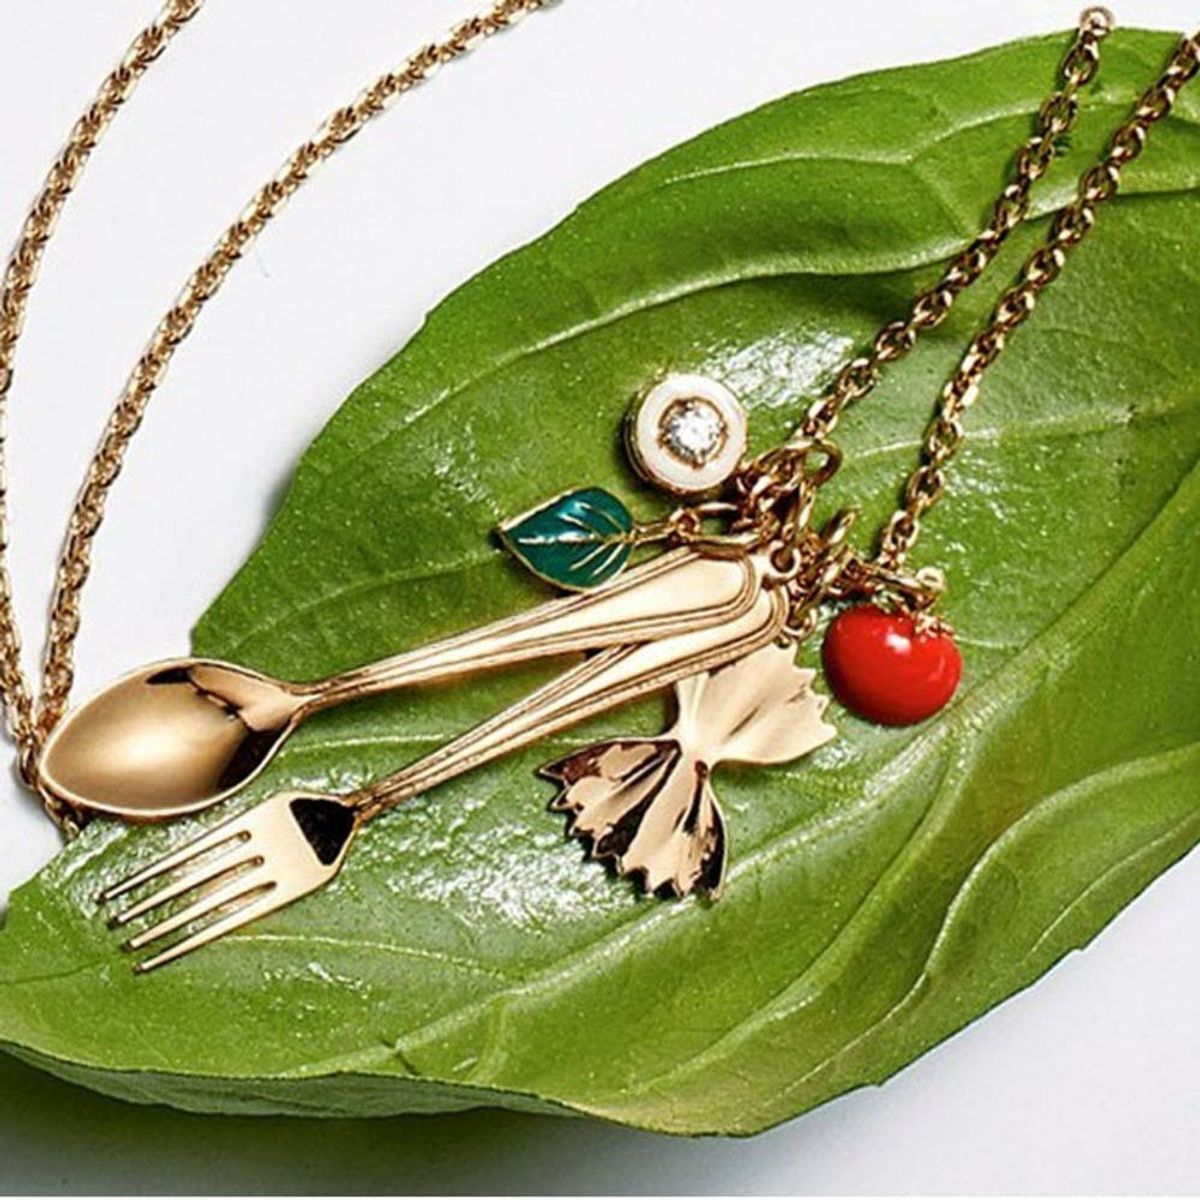 Alison Lou’s Latest Jewelry Collection Is Made for Pasta Lovers